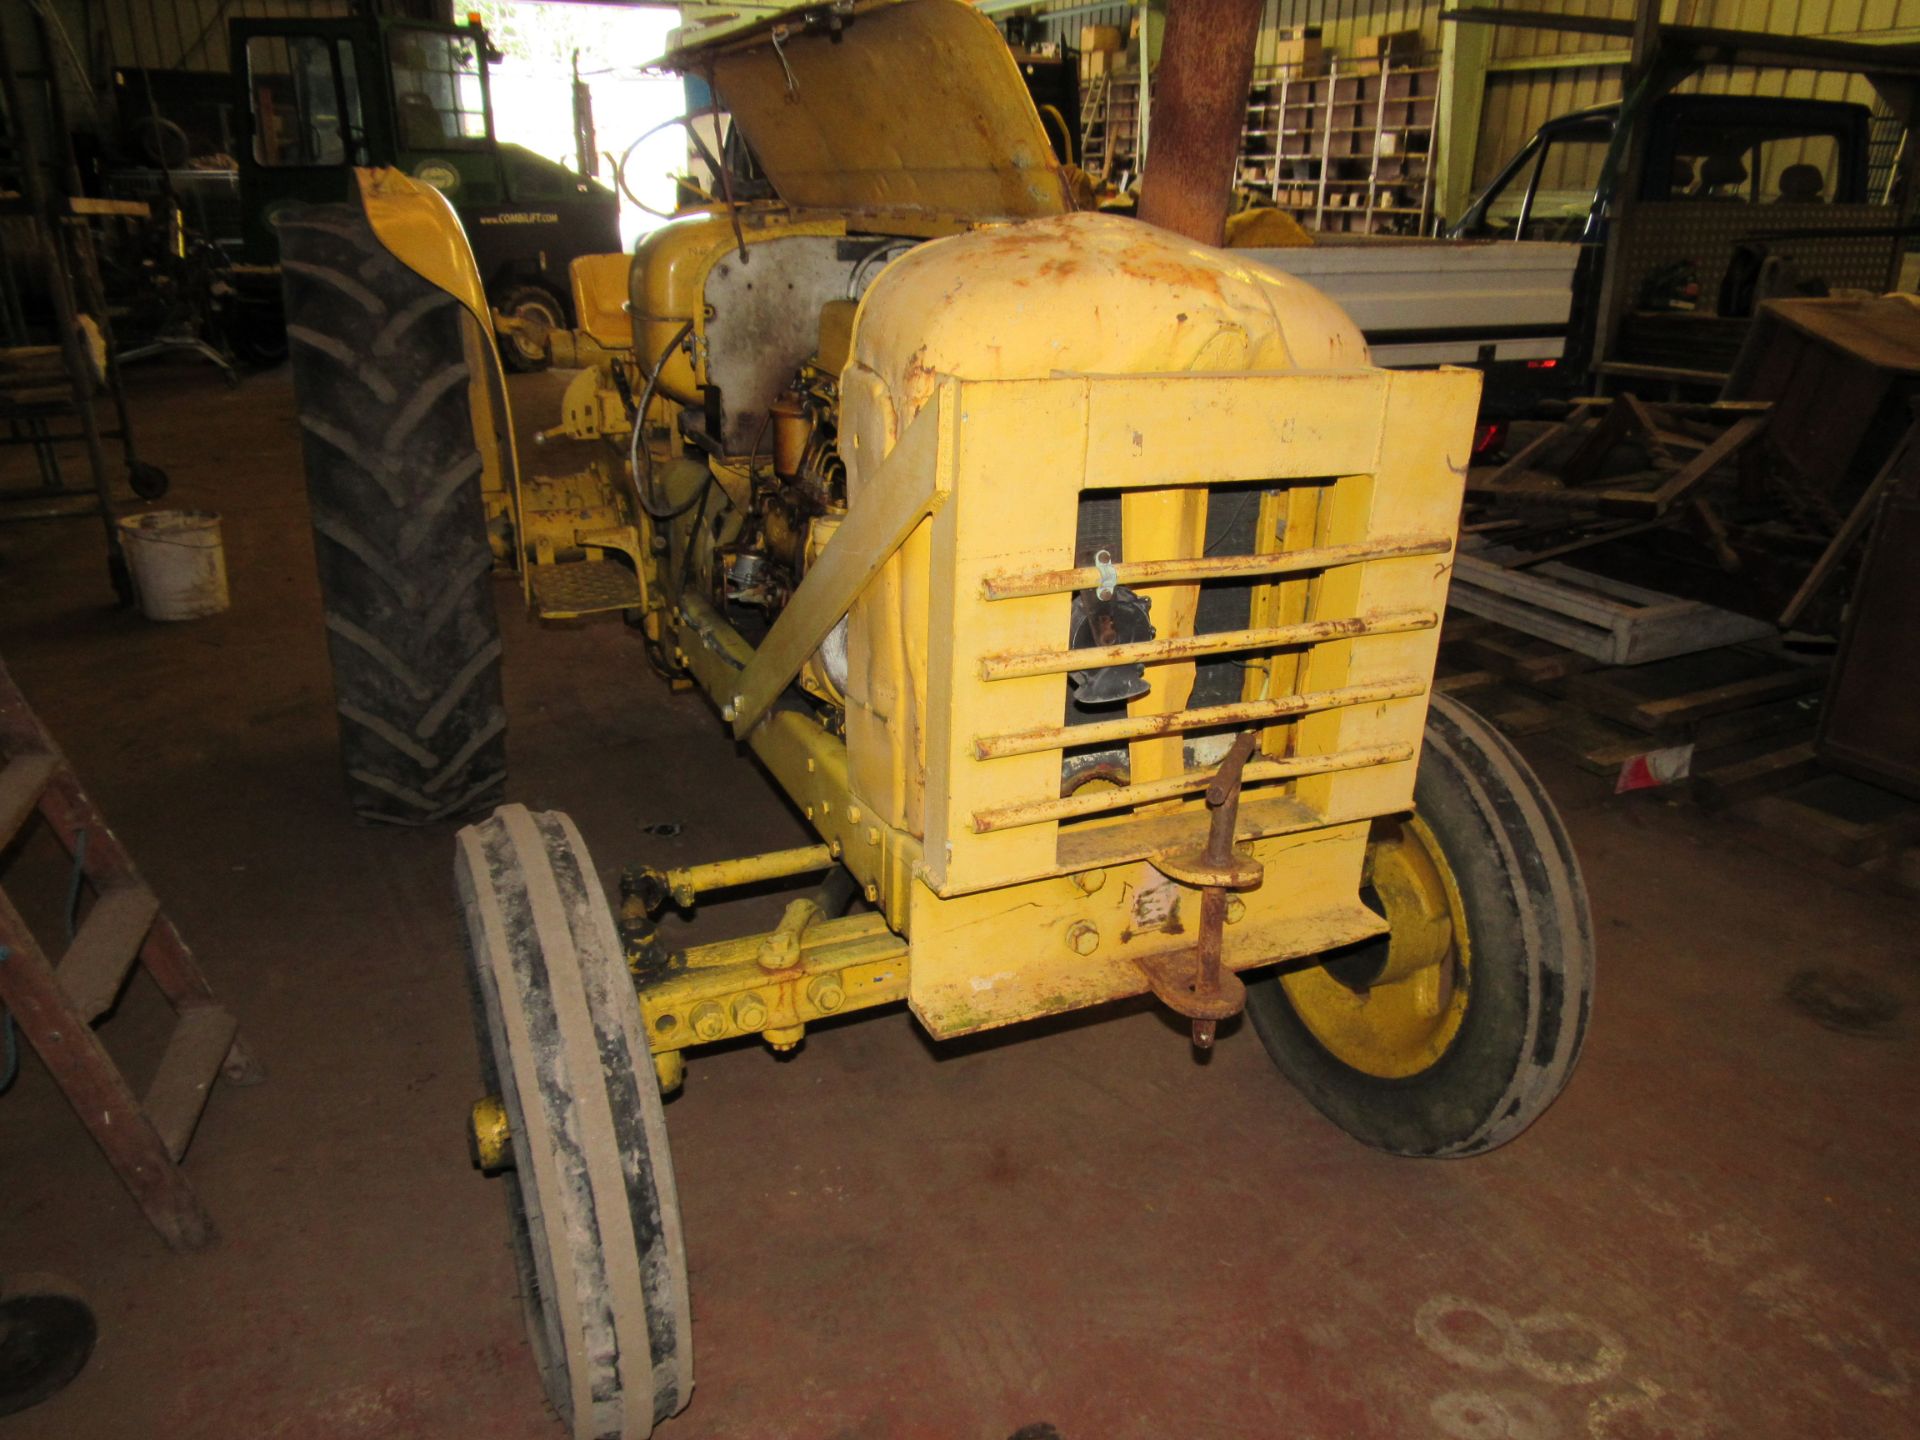 Fordson Power Major Industrial Vintage Tractor - Image 11 of 11